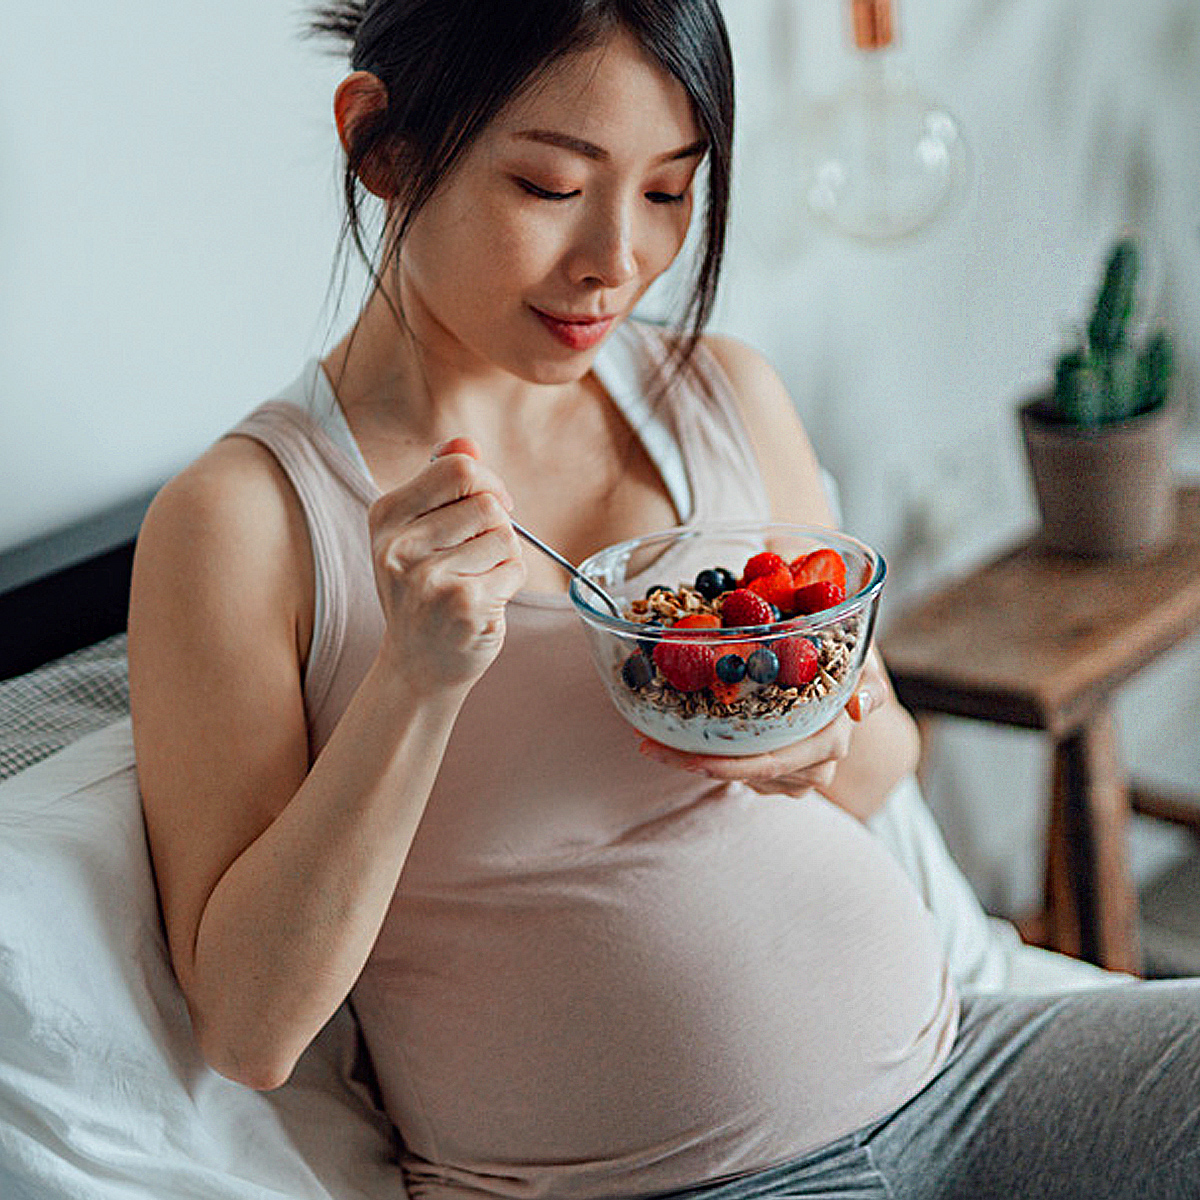 Pregnant woman eating a bowl of berries